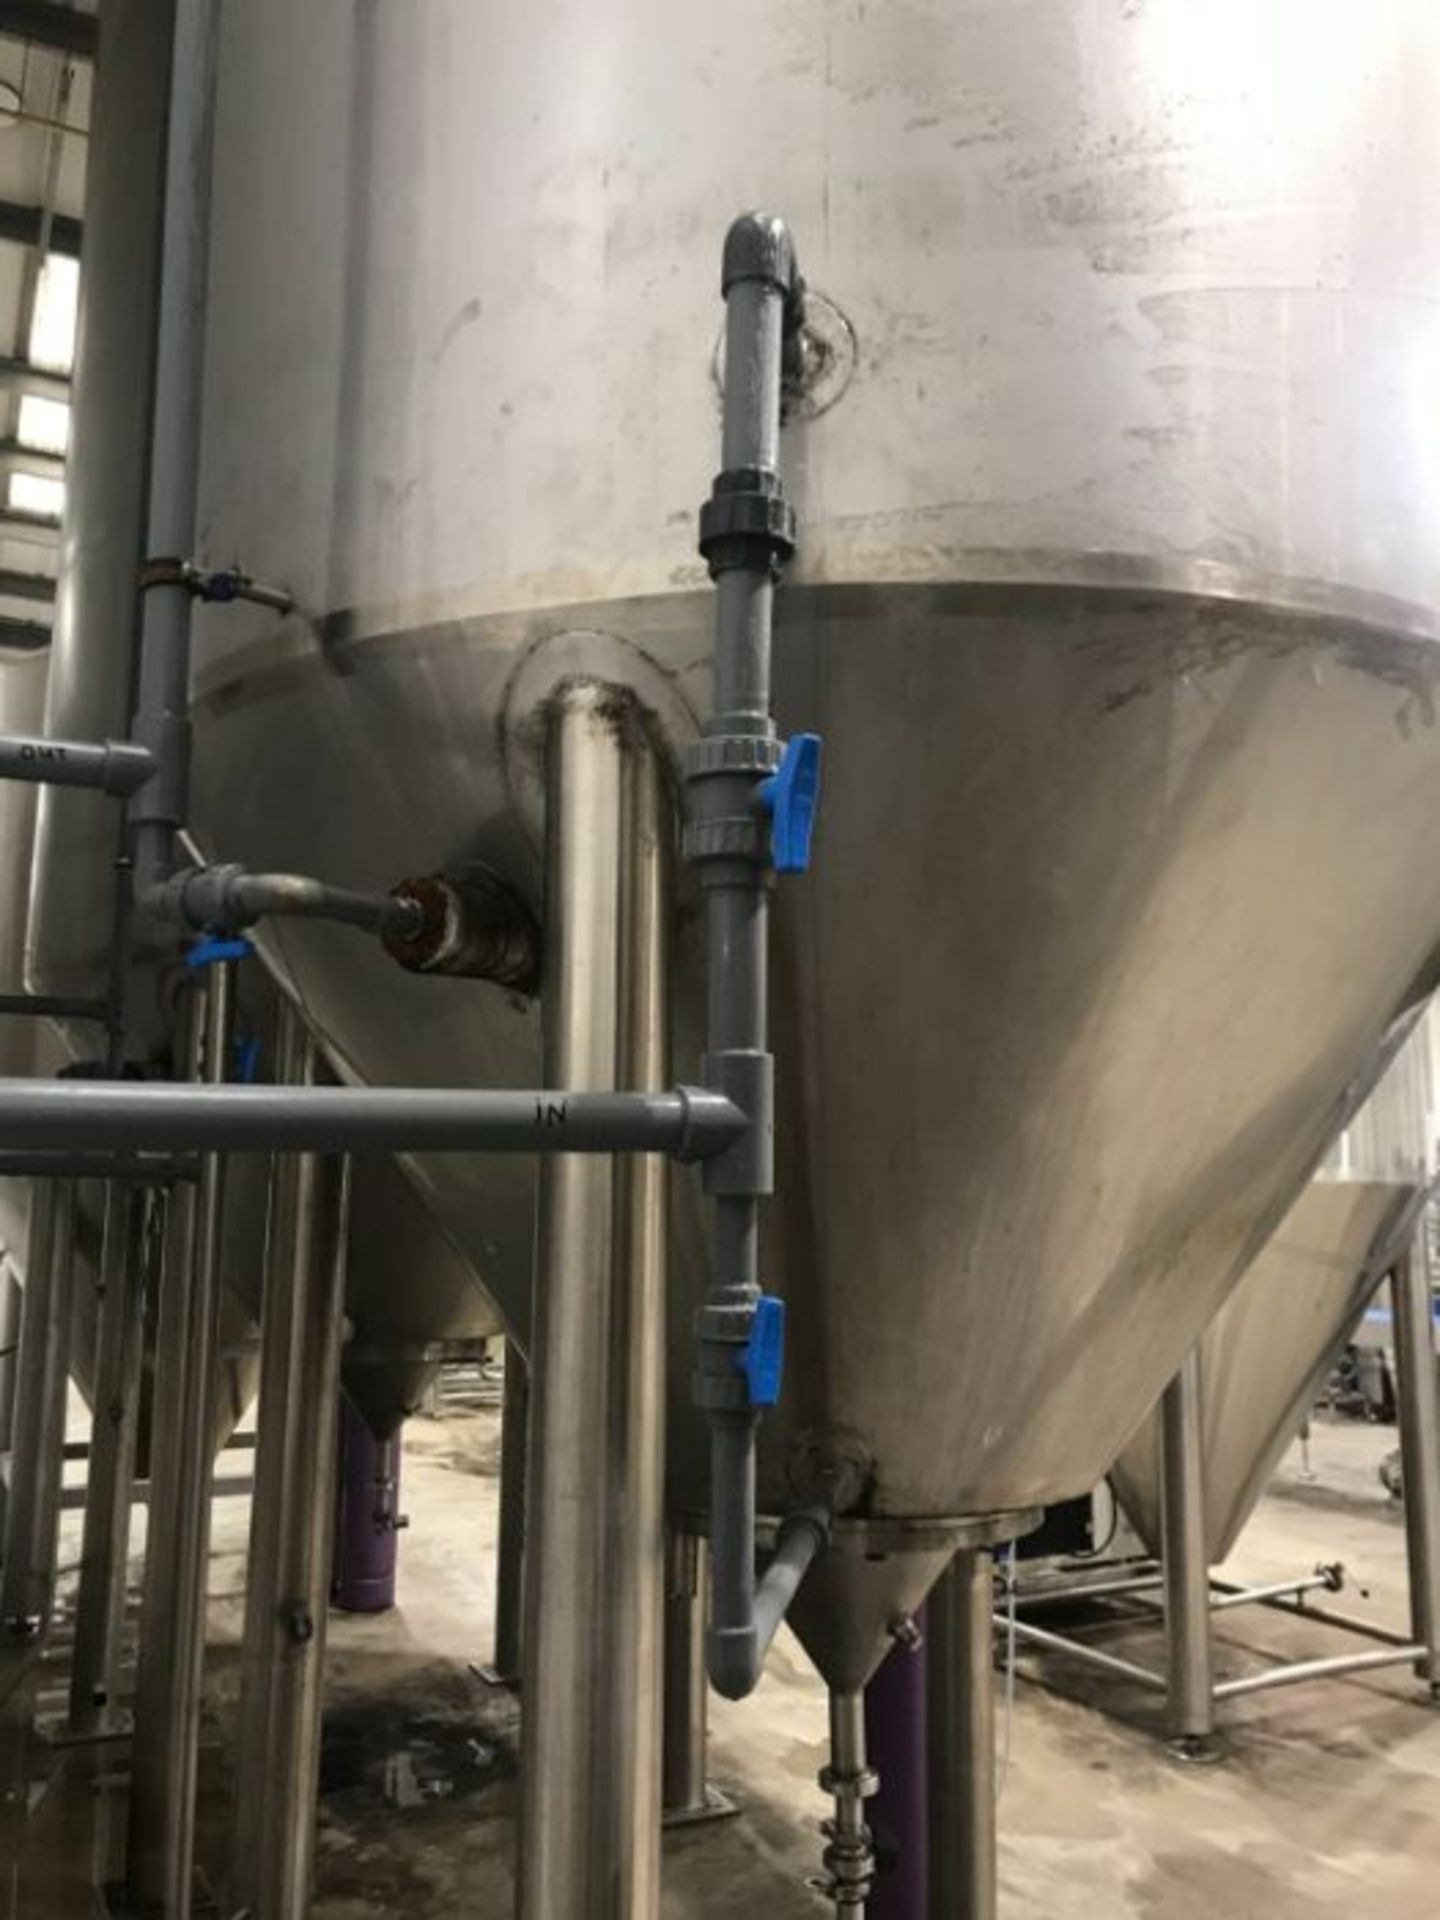 Ningbo Lehui Food Machinery Co Ltd 10,000 litre stainless steel jacketed tank (2014) - Image 4 of 5